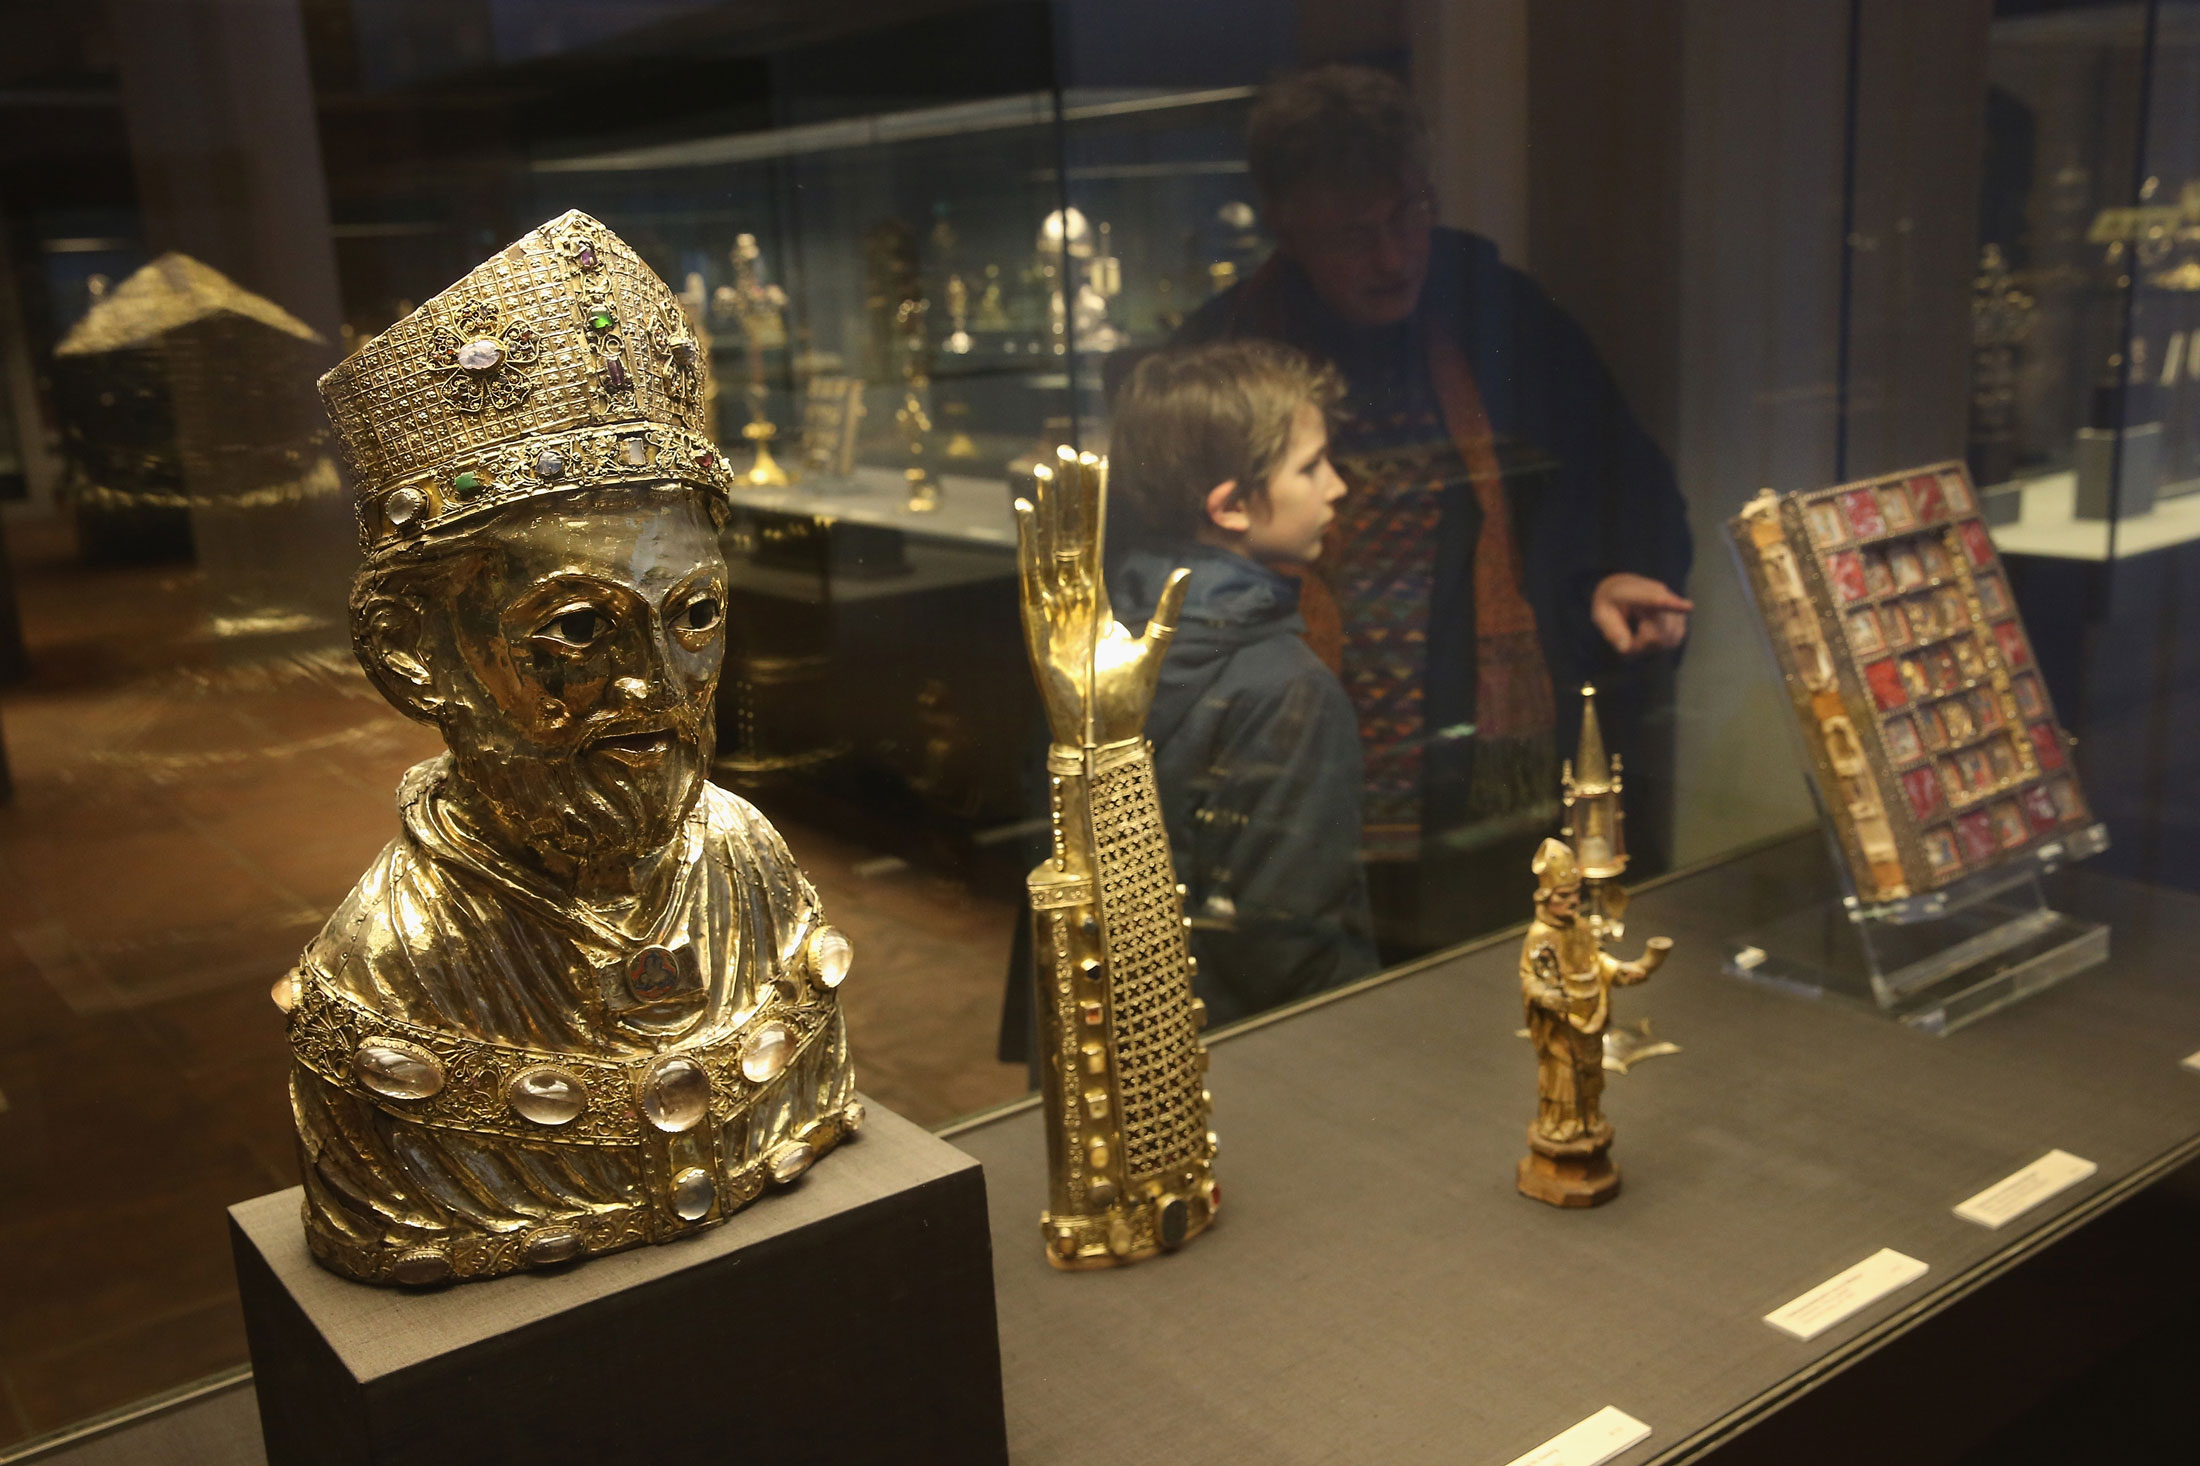 A father and son look at artifacts of the Guelph Treasure at the Museum of Decorative Arts on Feb. 26, 2015.